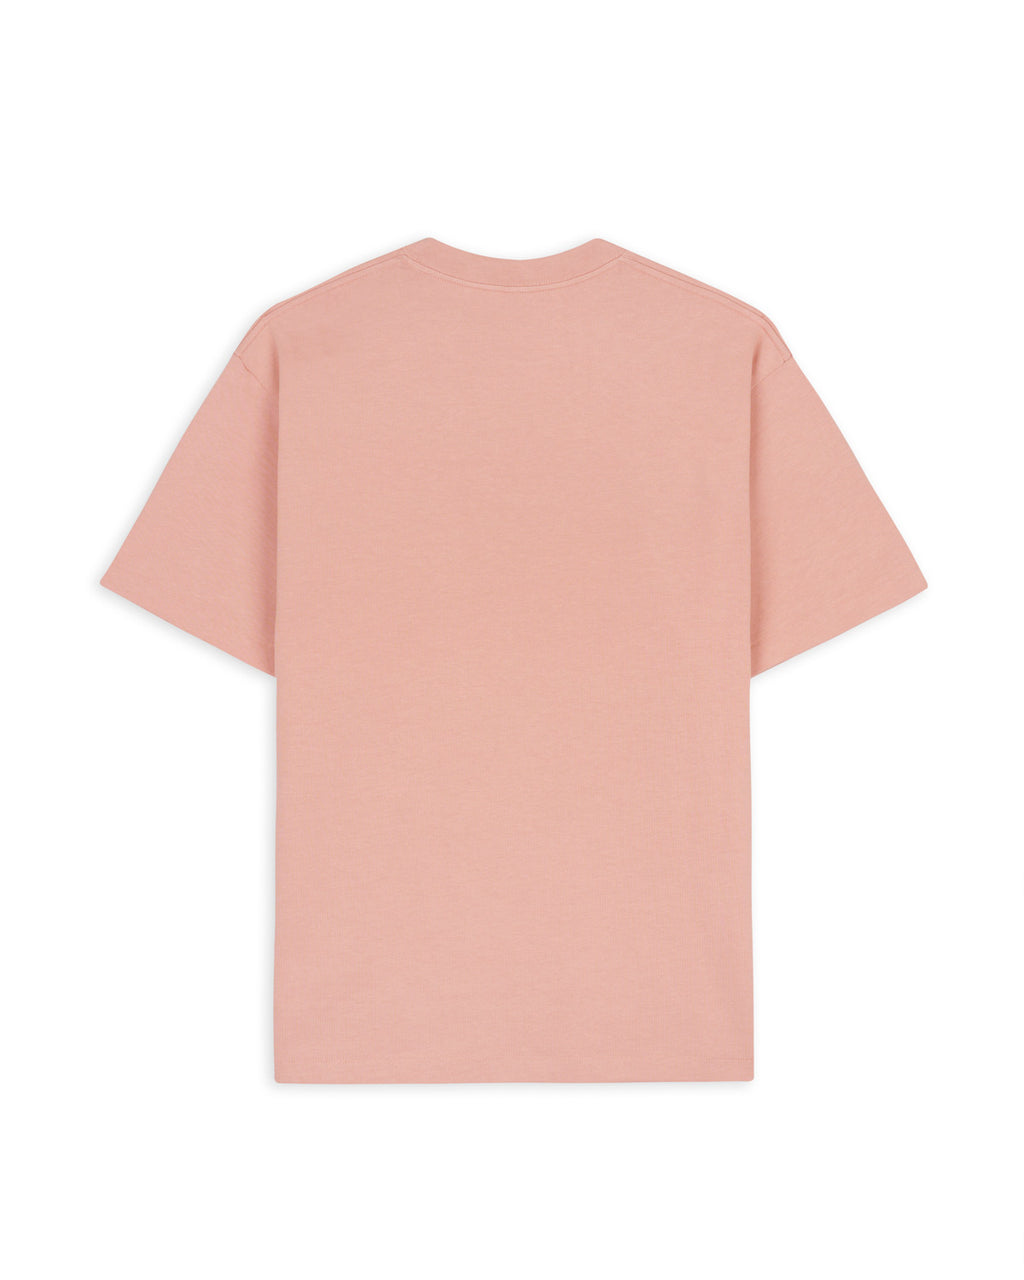 3D Embroidered Logohead Heavy Weight T-Shirt - Peach 2